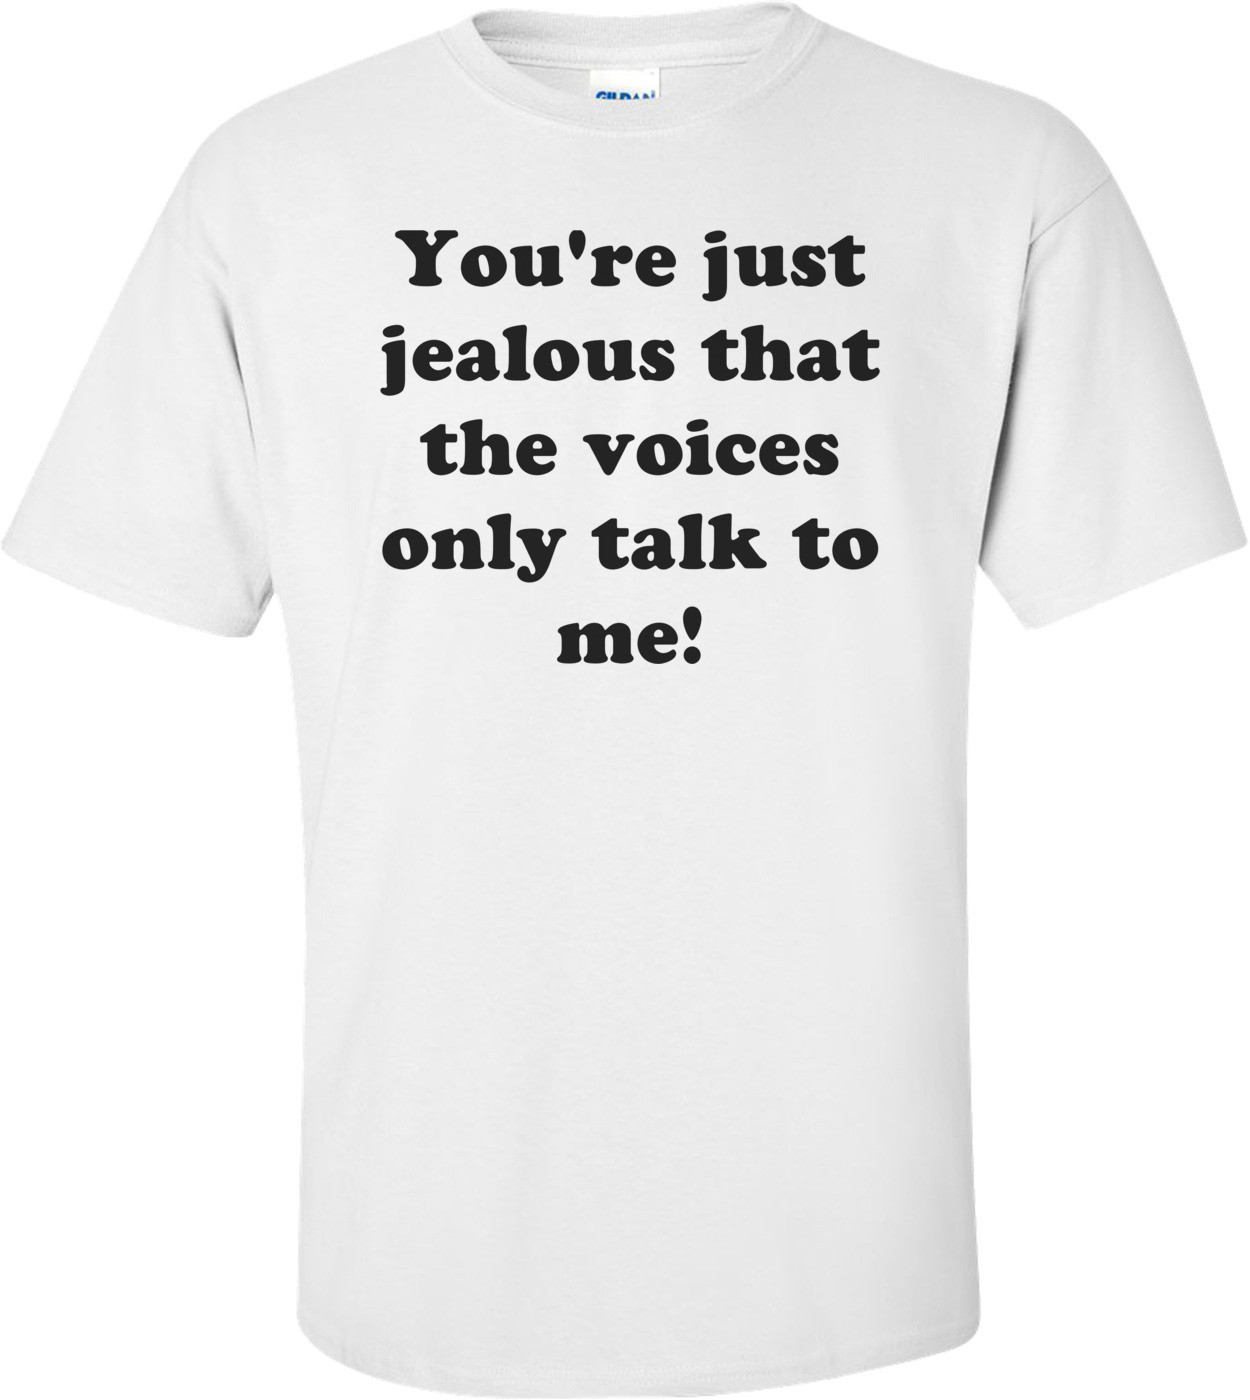 You're just jealous that the voices only talk to me! Shirt